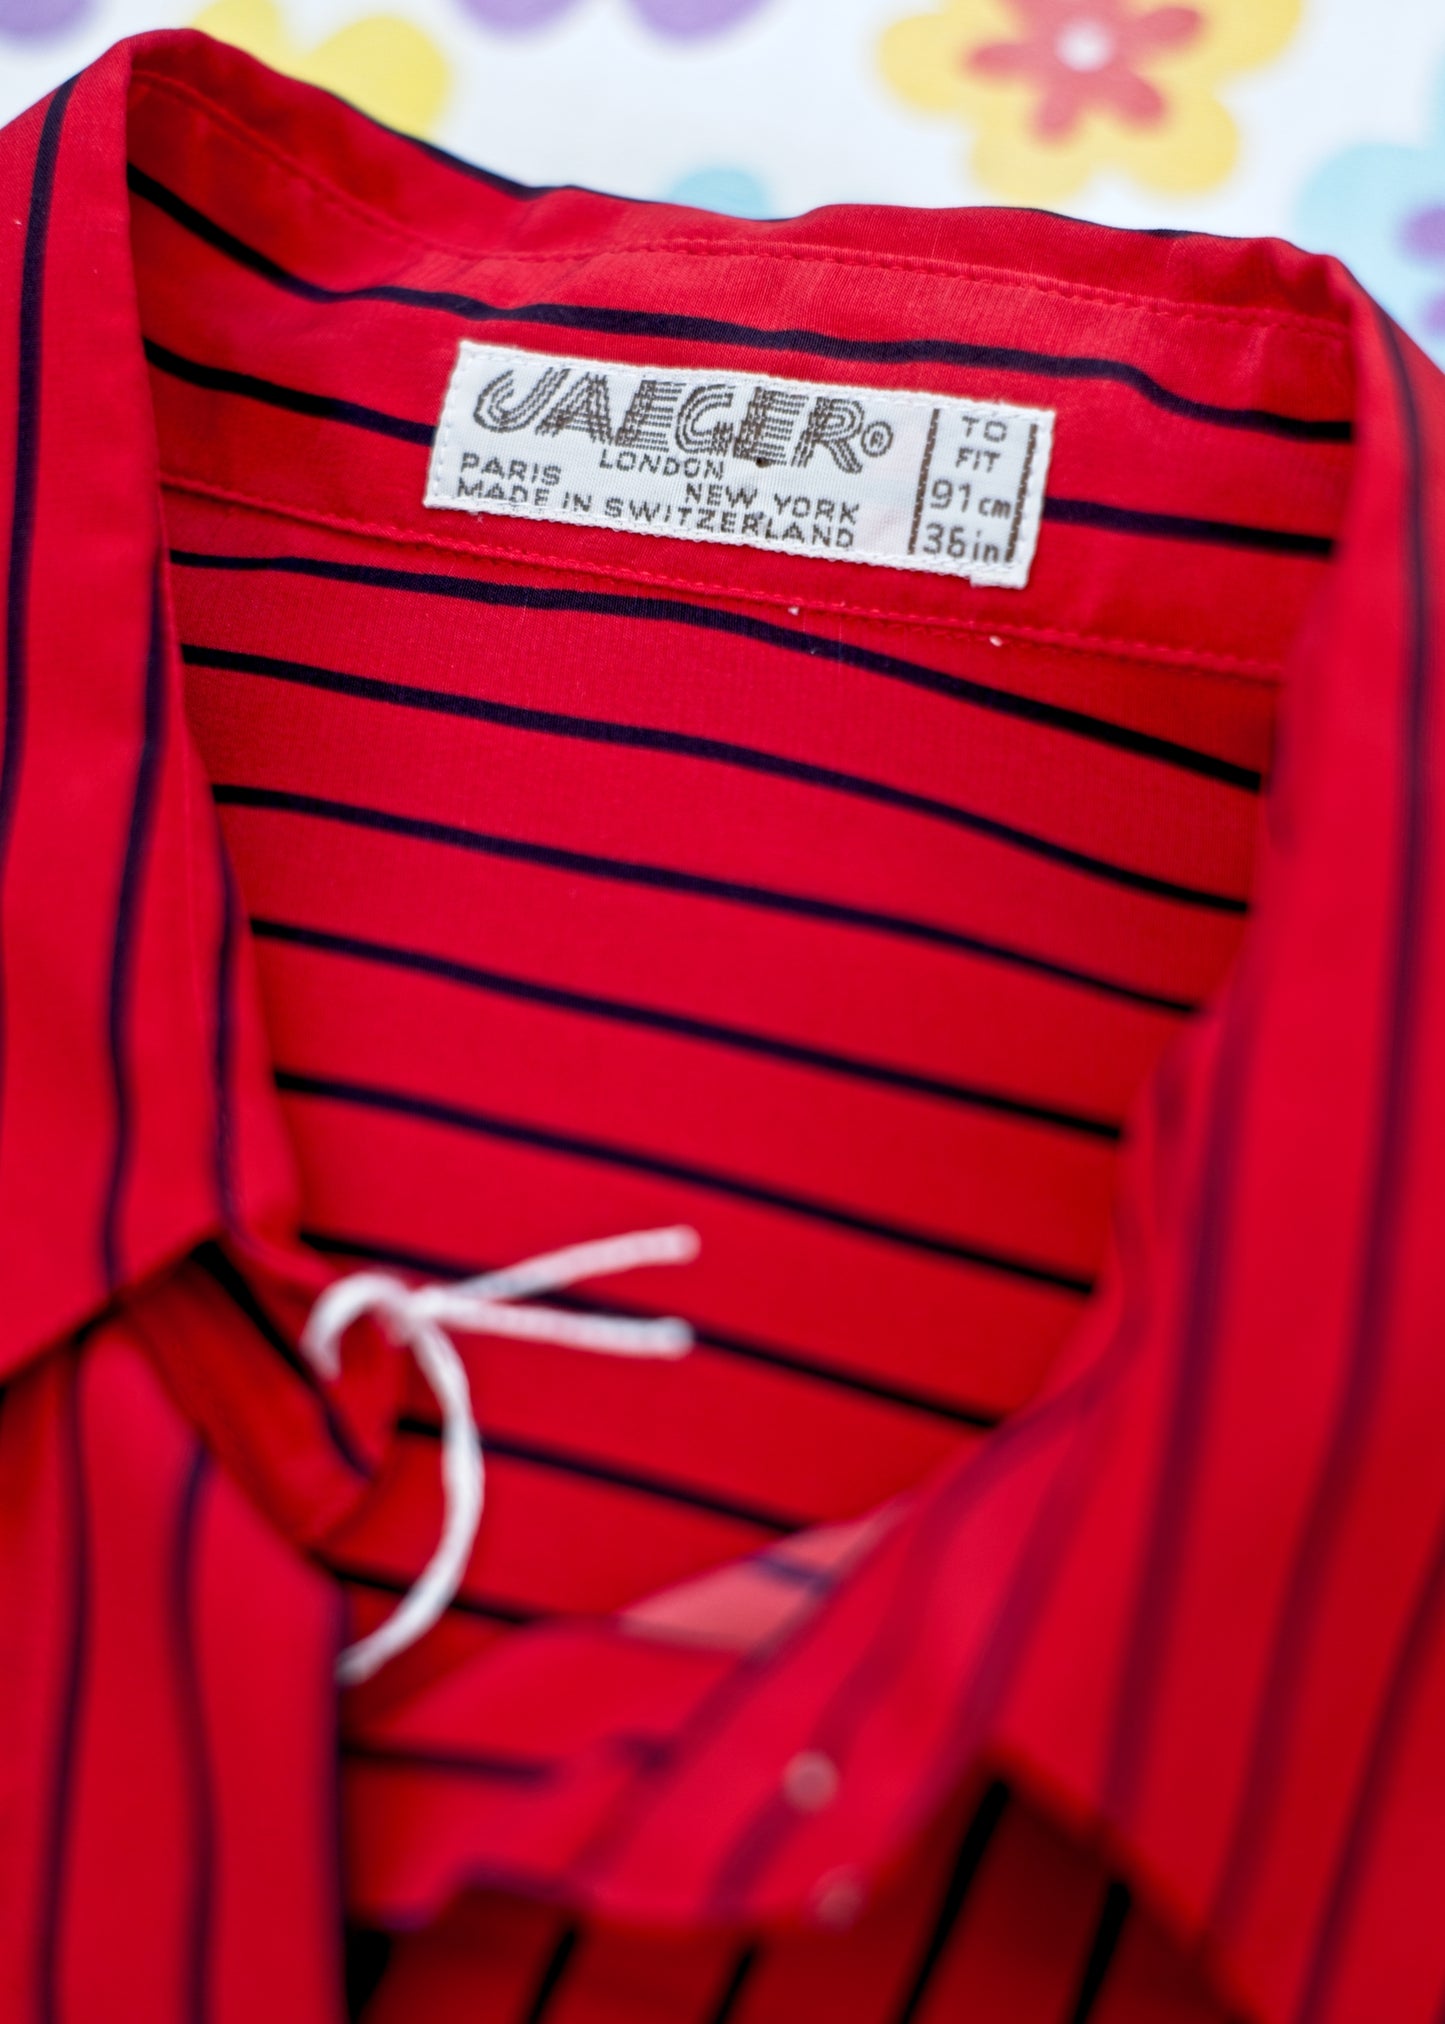 vintage jaeger silk pinstripe blouse in tomato red and black, made in Switzerland to fit 36 bust